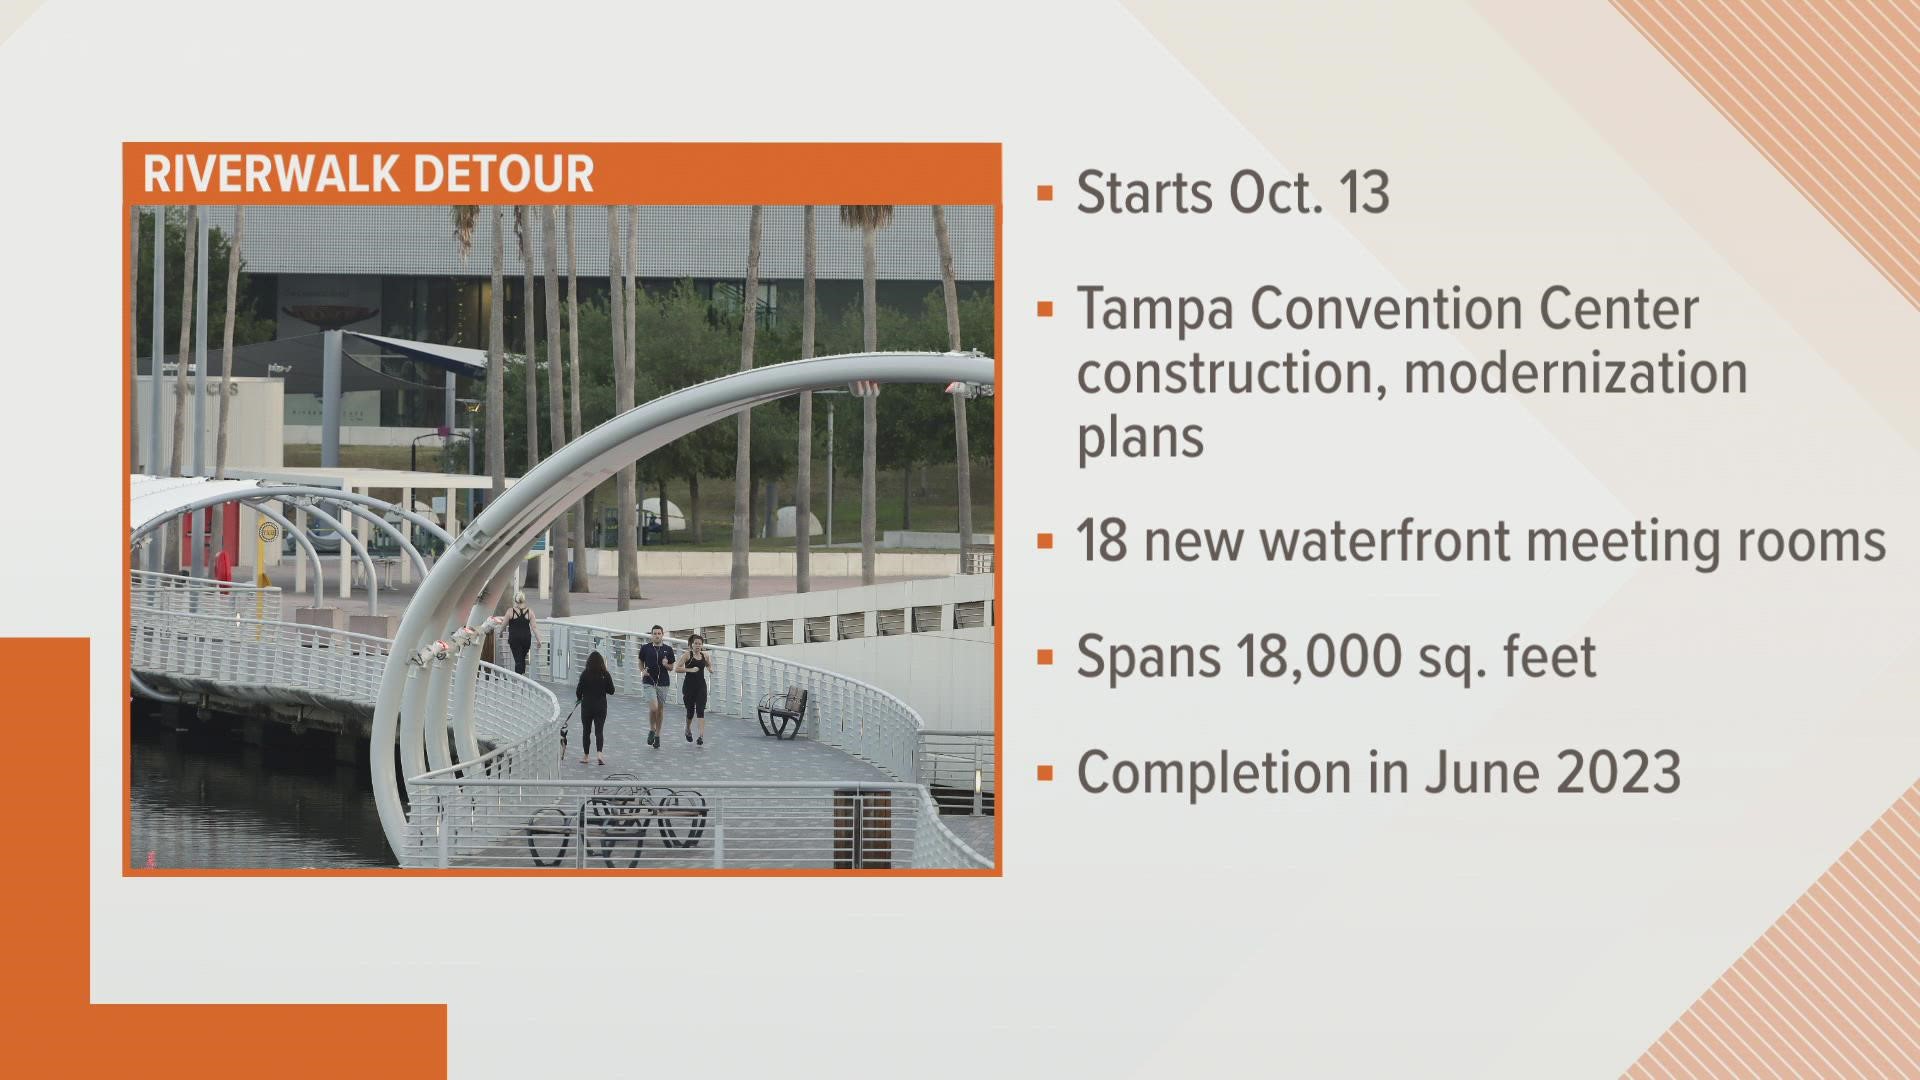 The stretch of the riverwalk behind the Tampa Convention Center will be closed off from Oct. 13 through at least November 2022.